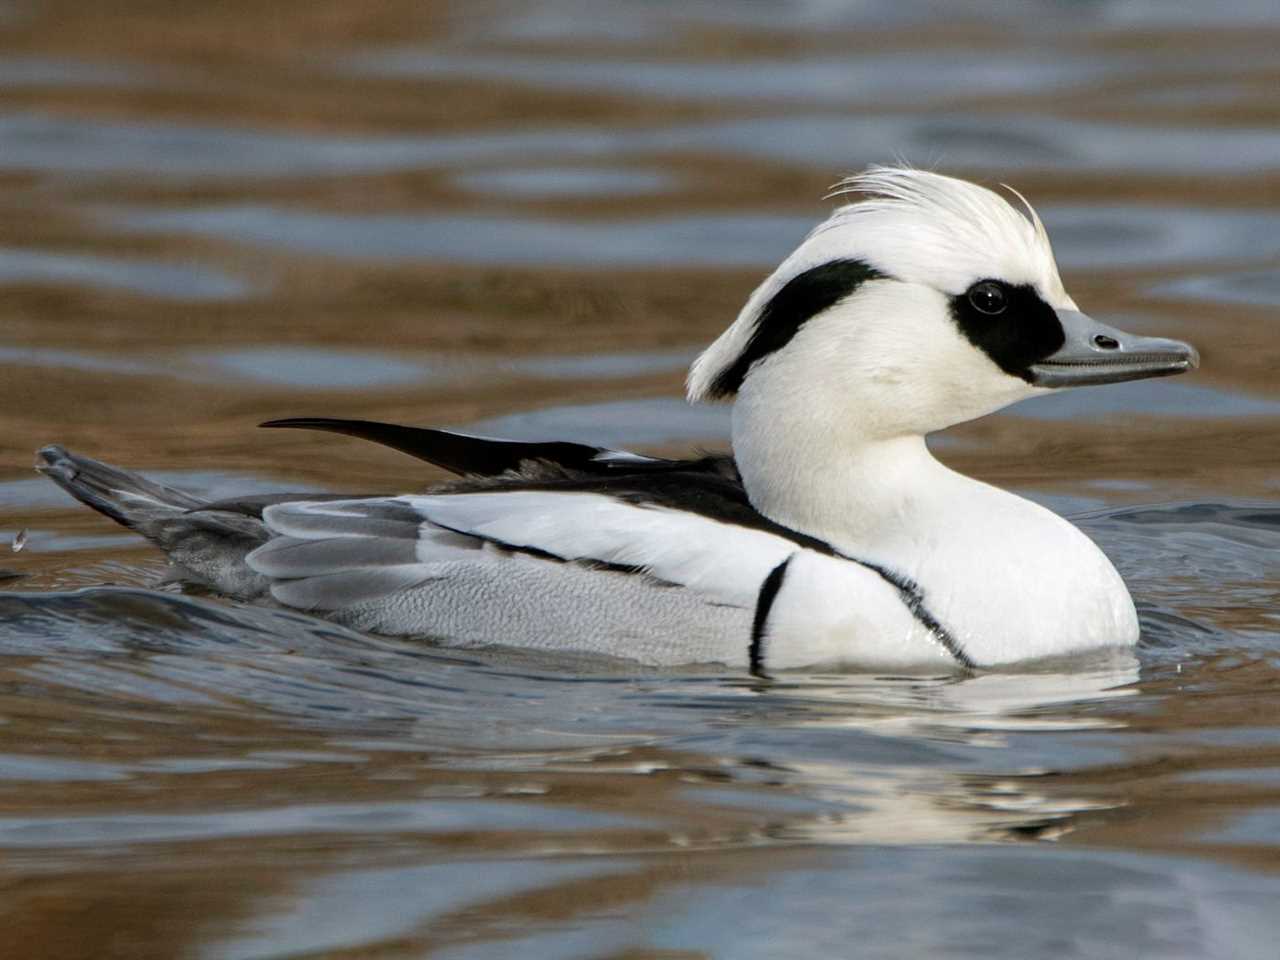 Physical Characteristics of Black and White Ducks